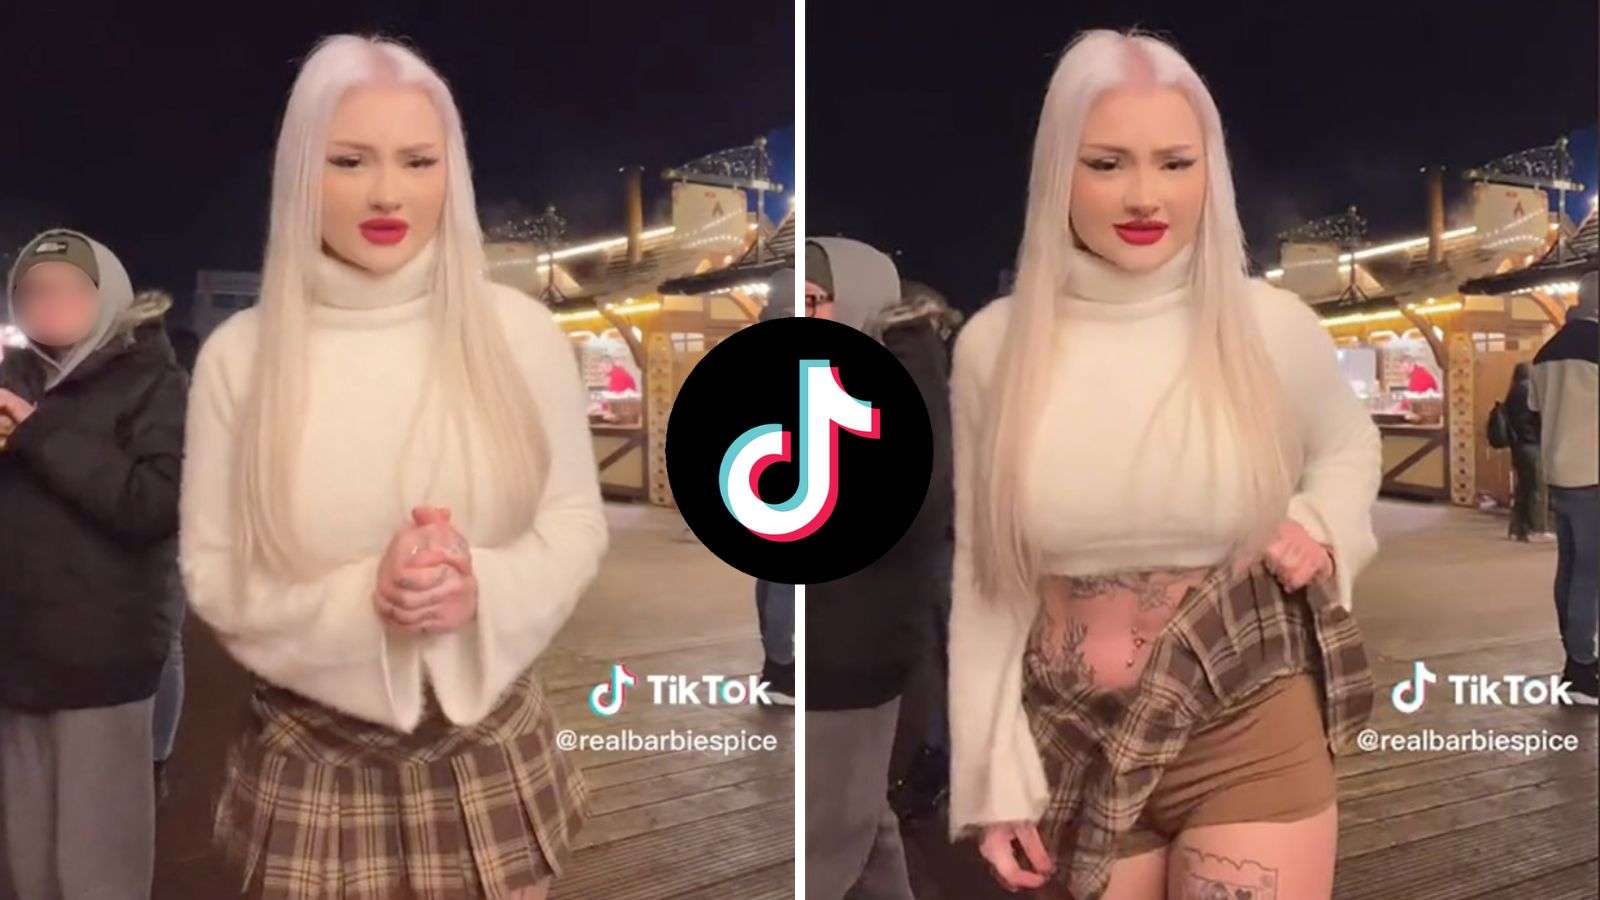 OnlyFans model 'humiliated' after getting kicked off ice-skating rink over mini skirt